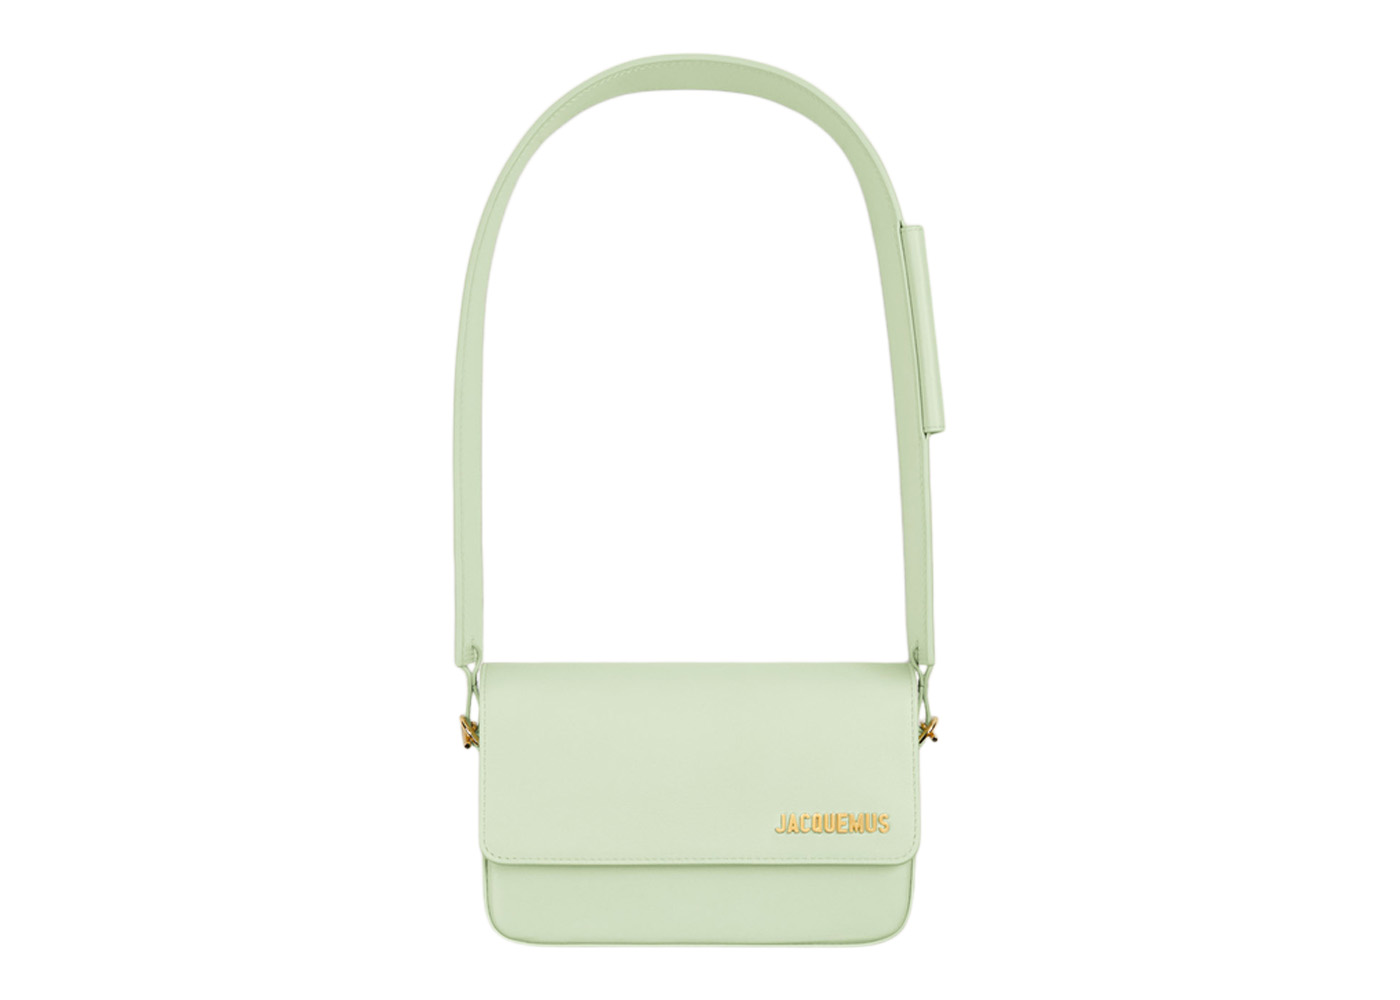 Jacquemus Le Carinu Flap Shoulder Bag Light Green in Leather 